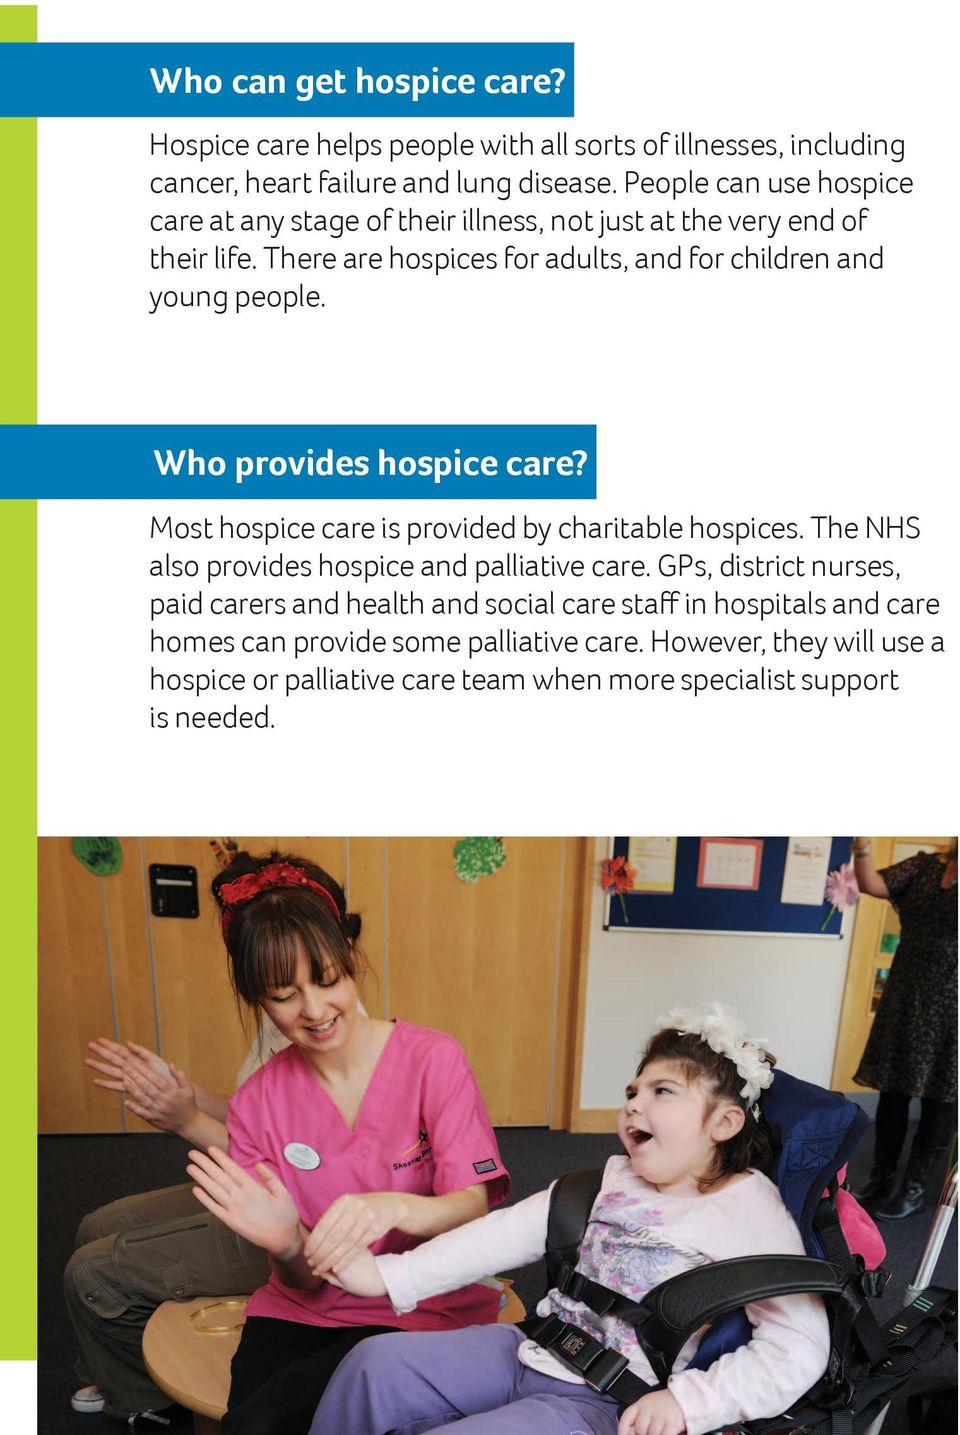 Who provides hospice care? Most hospice care is provided by charitable hospices. The NHS also provides hospice and palliative care.